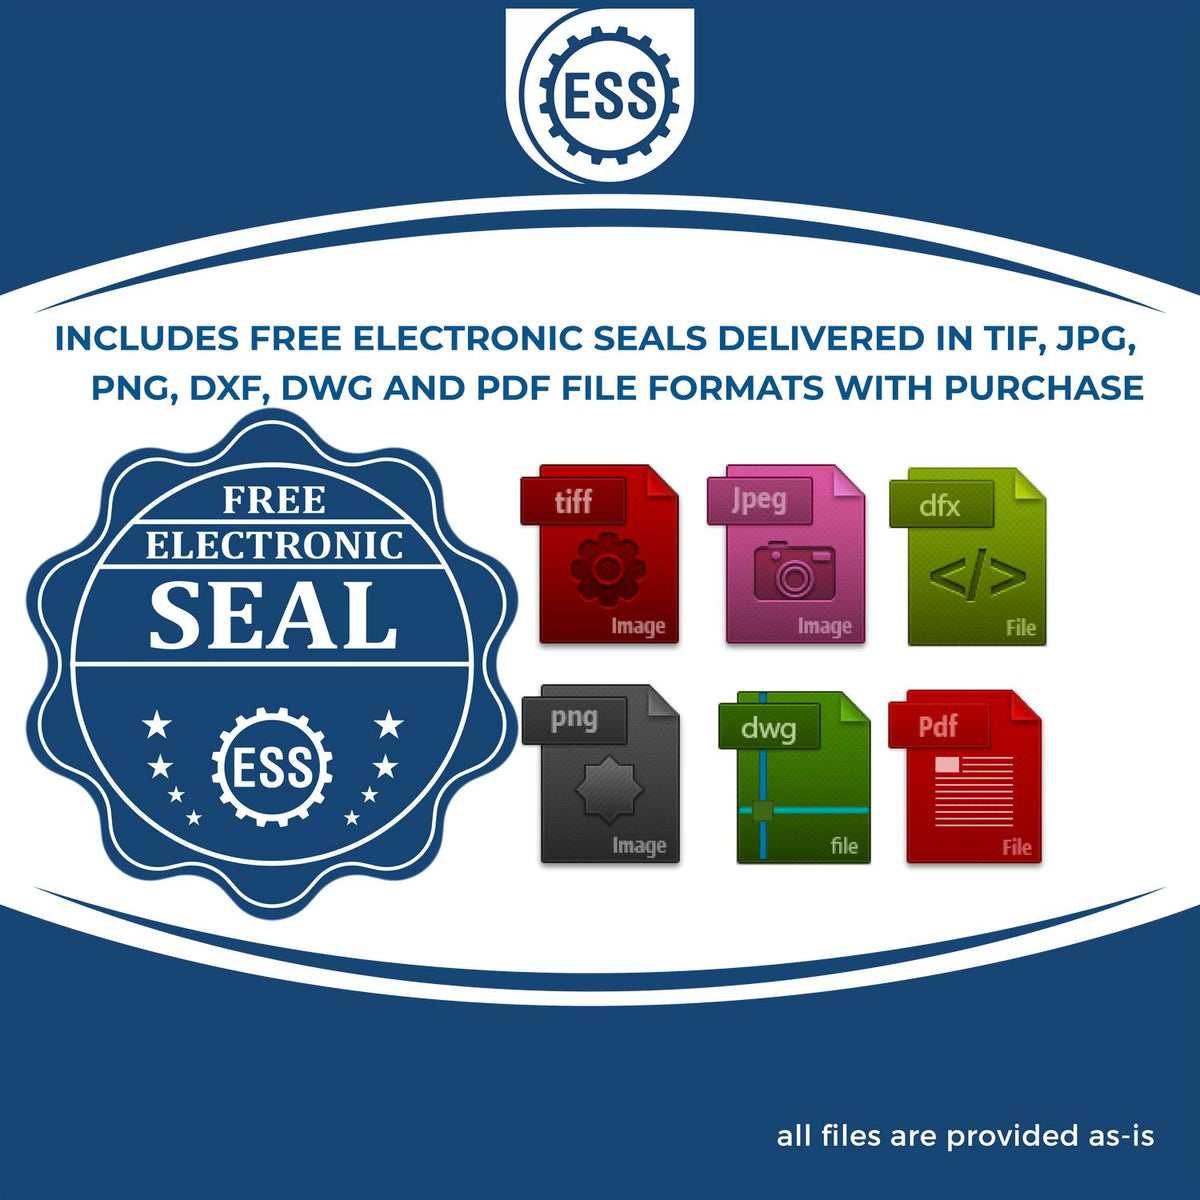 An infographic for the free electronic seal for the State of Michigan Extended Long Reach Engineer Seal illustrating the different file type icons such as DXF, DWG, TIF, JPG and PNG.